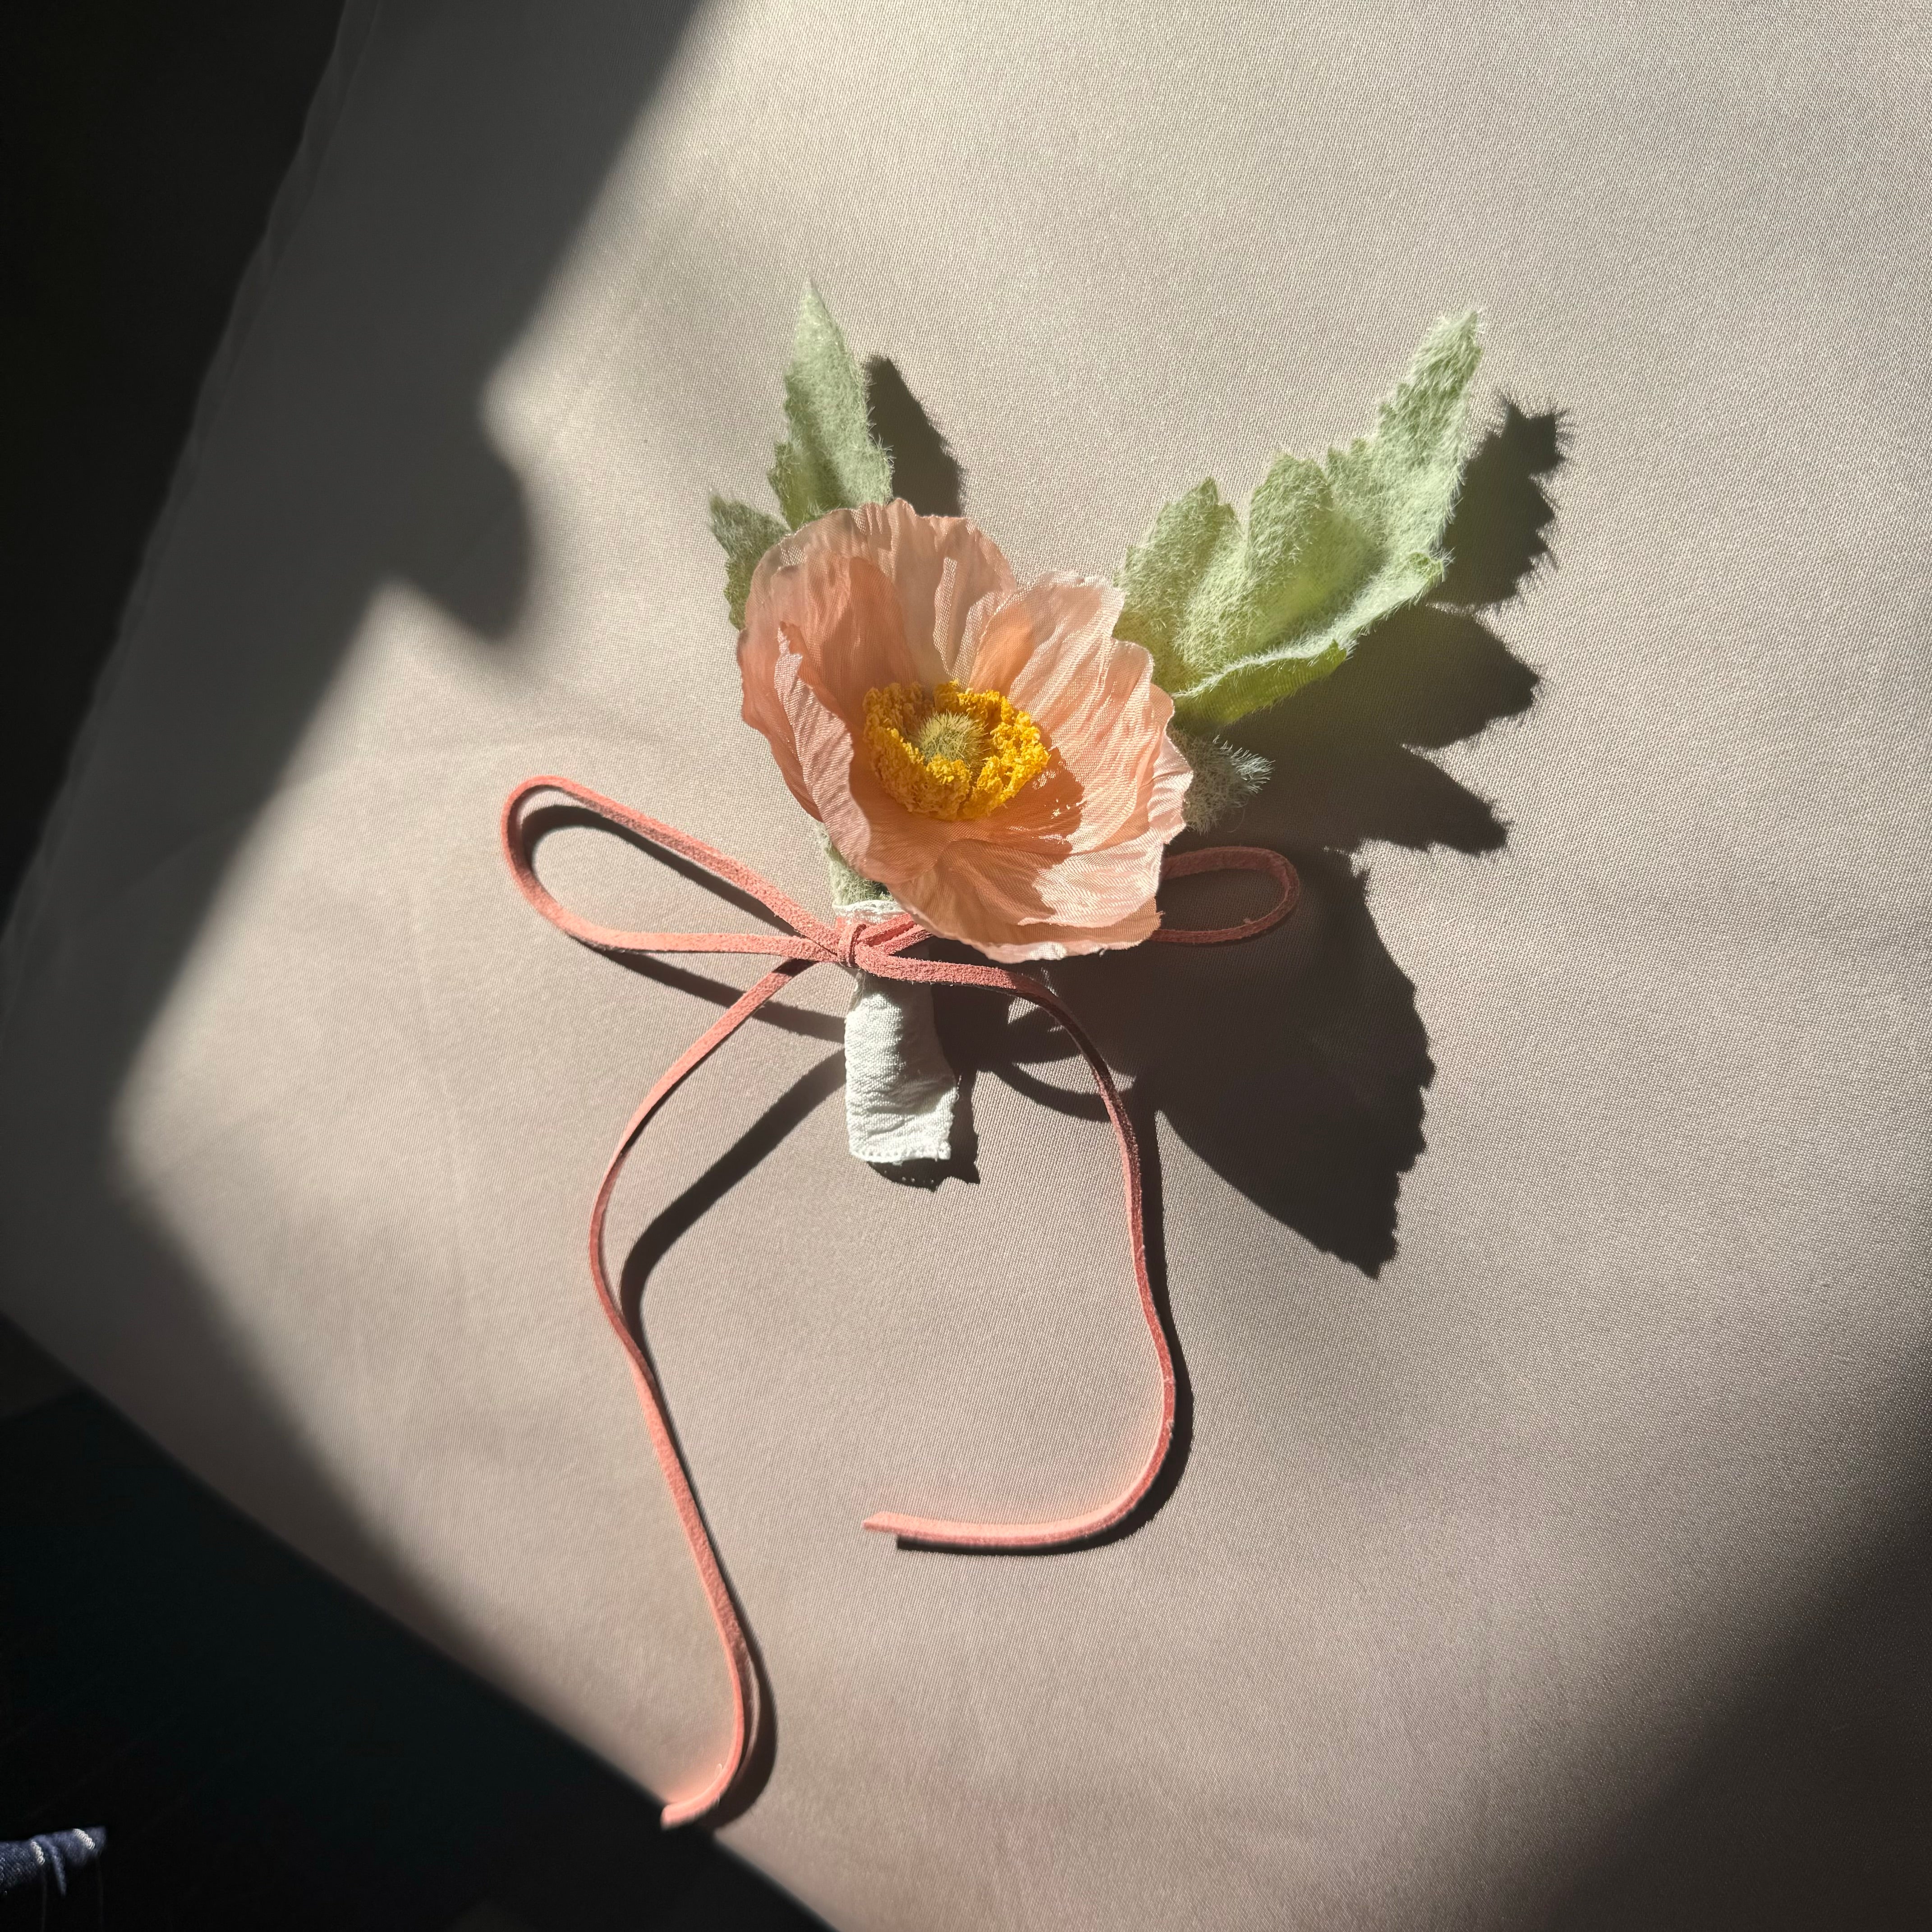 Spring Fling - Buttonhole (2 styles)